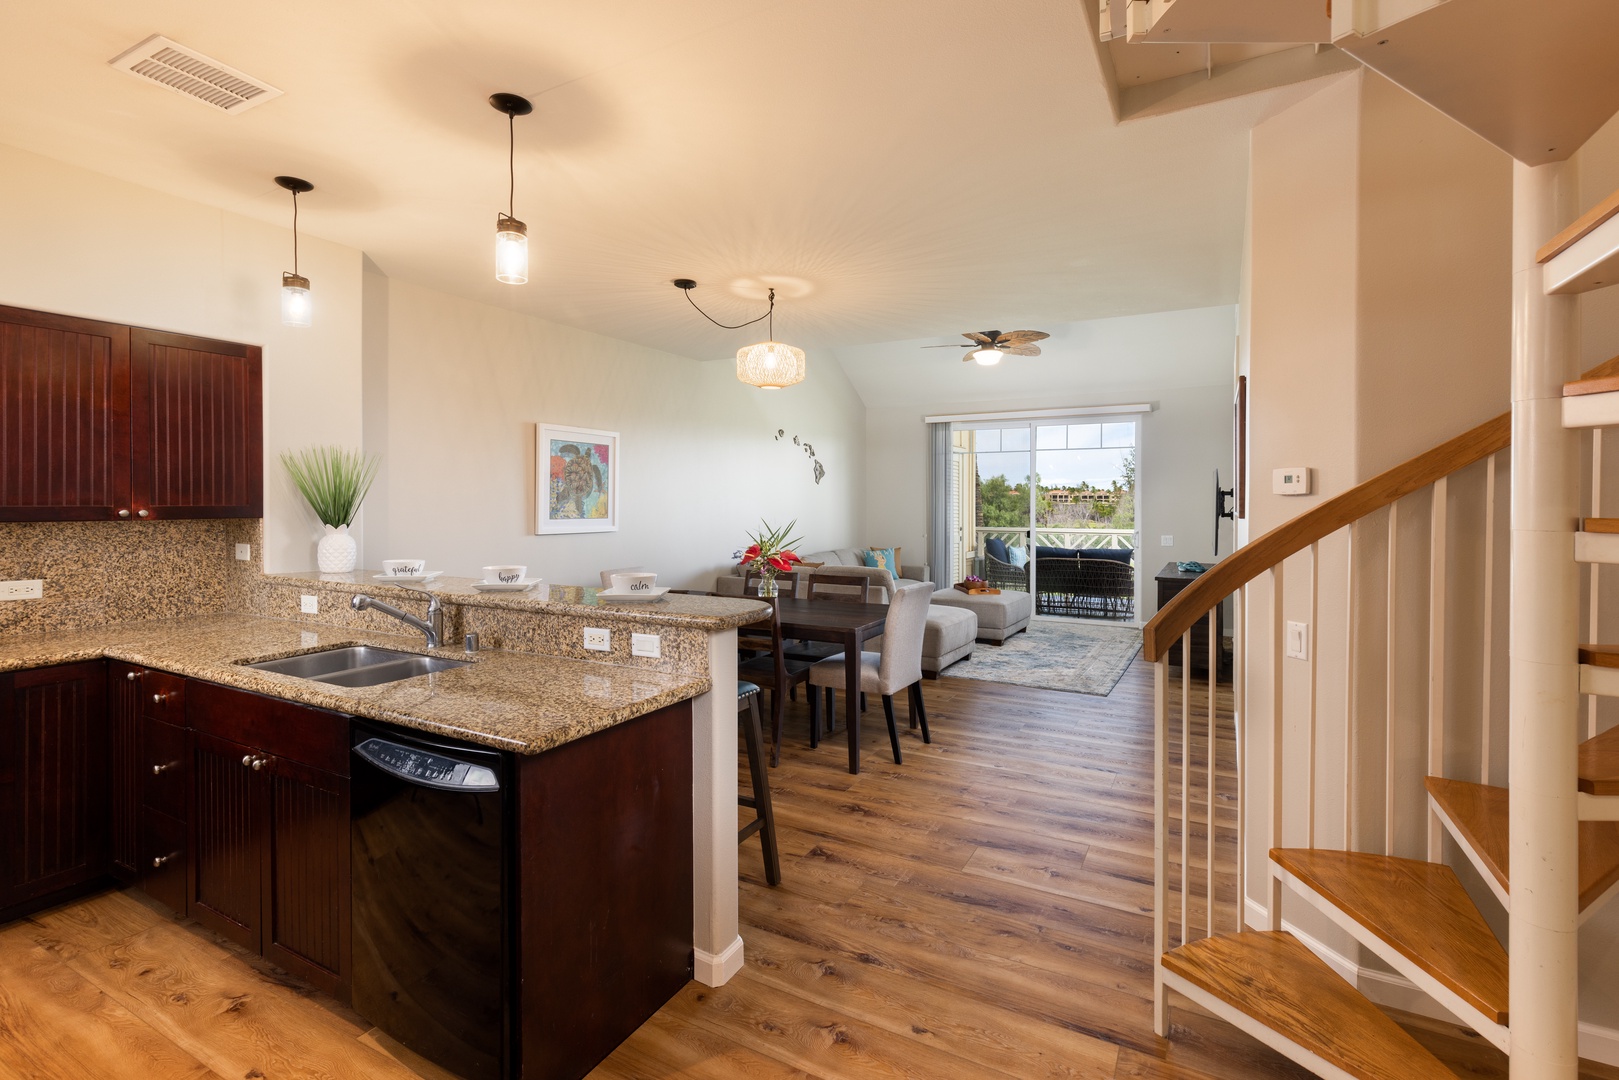 Waikoloa Vacation Rentals, Fairway Villas at Waikoloa Beach Resort E34 - Lots of lighting, beautiful floors and views from the open concept great room